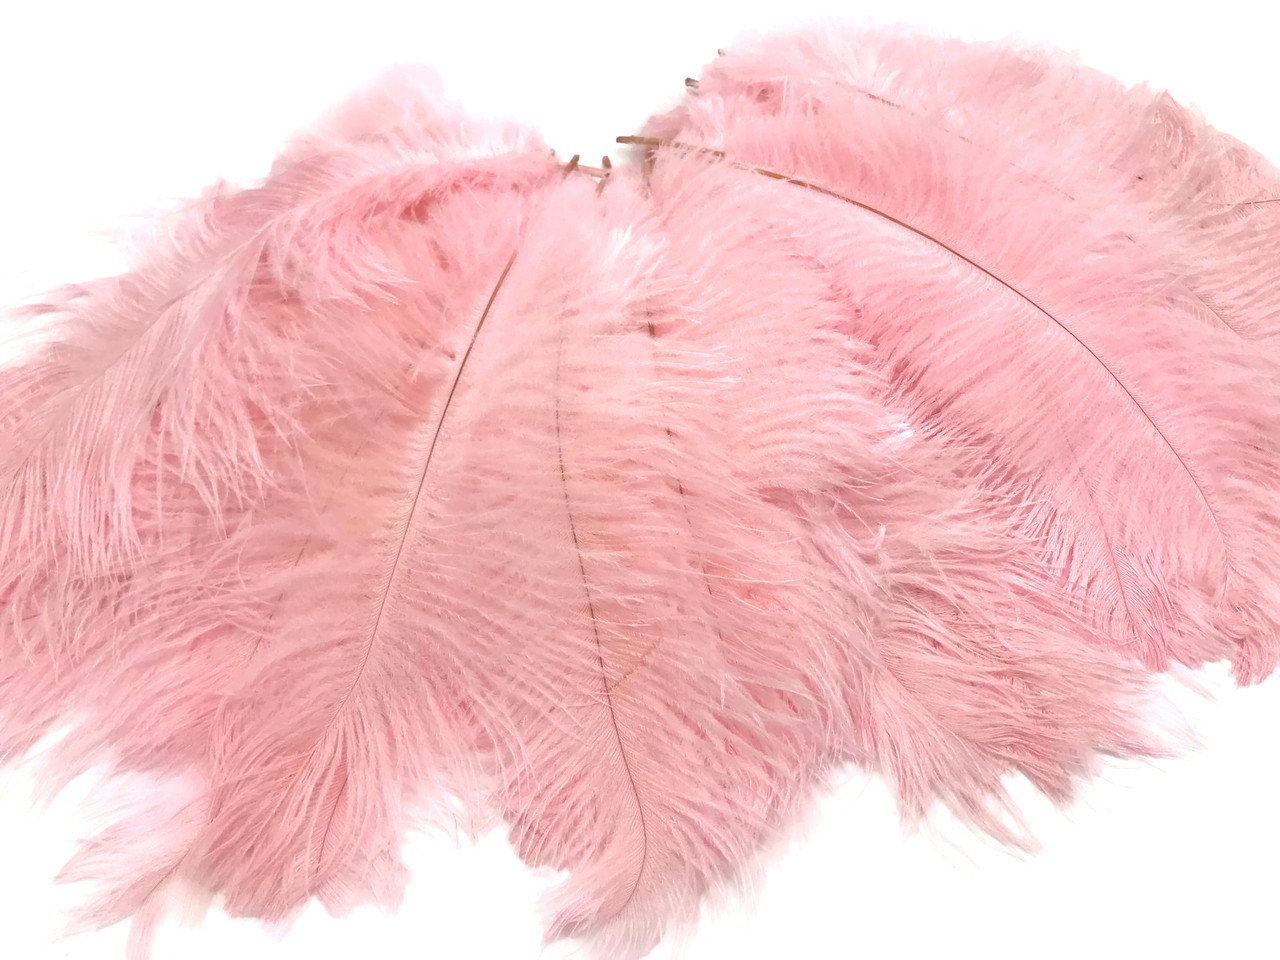 https://cdn11.bigcommerce.com/s-enbou/images/stencil/1280x1280/products/9965/37732/14-17_inches_light_pink_ostrich_drab_feathers_wholesale_supplier7__19897.1531417290.jpg?c=2